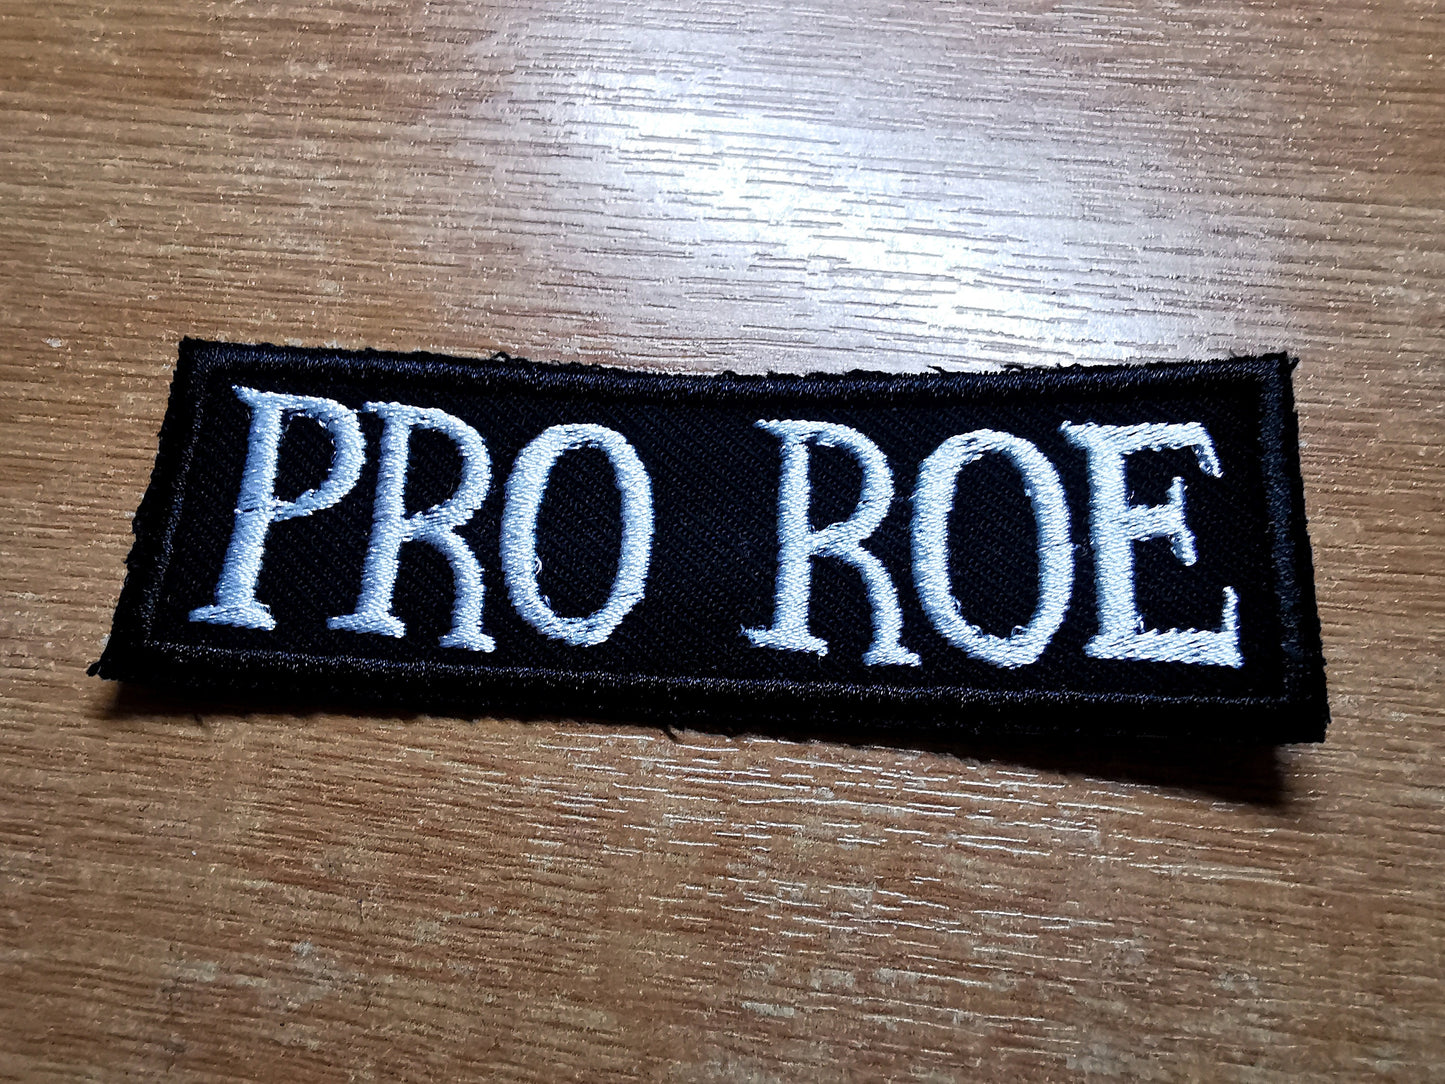 Pro Roe Embroidered Pro Choice Patch Abortion Activist and Feminist Embroidery